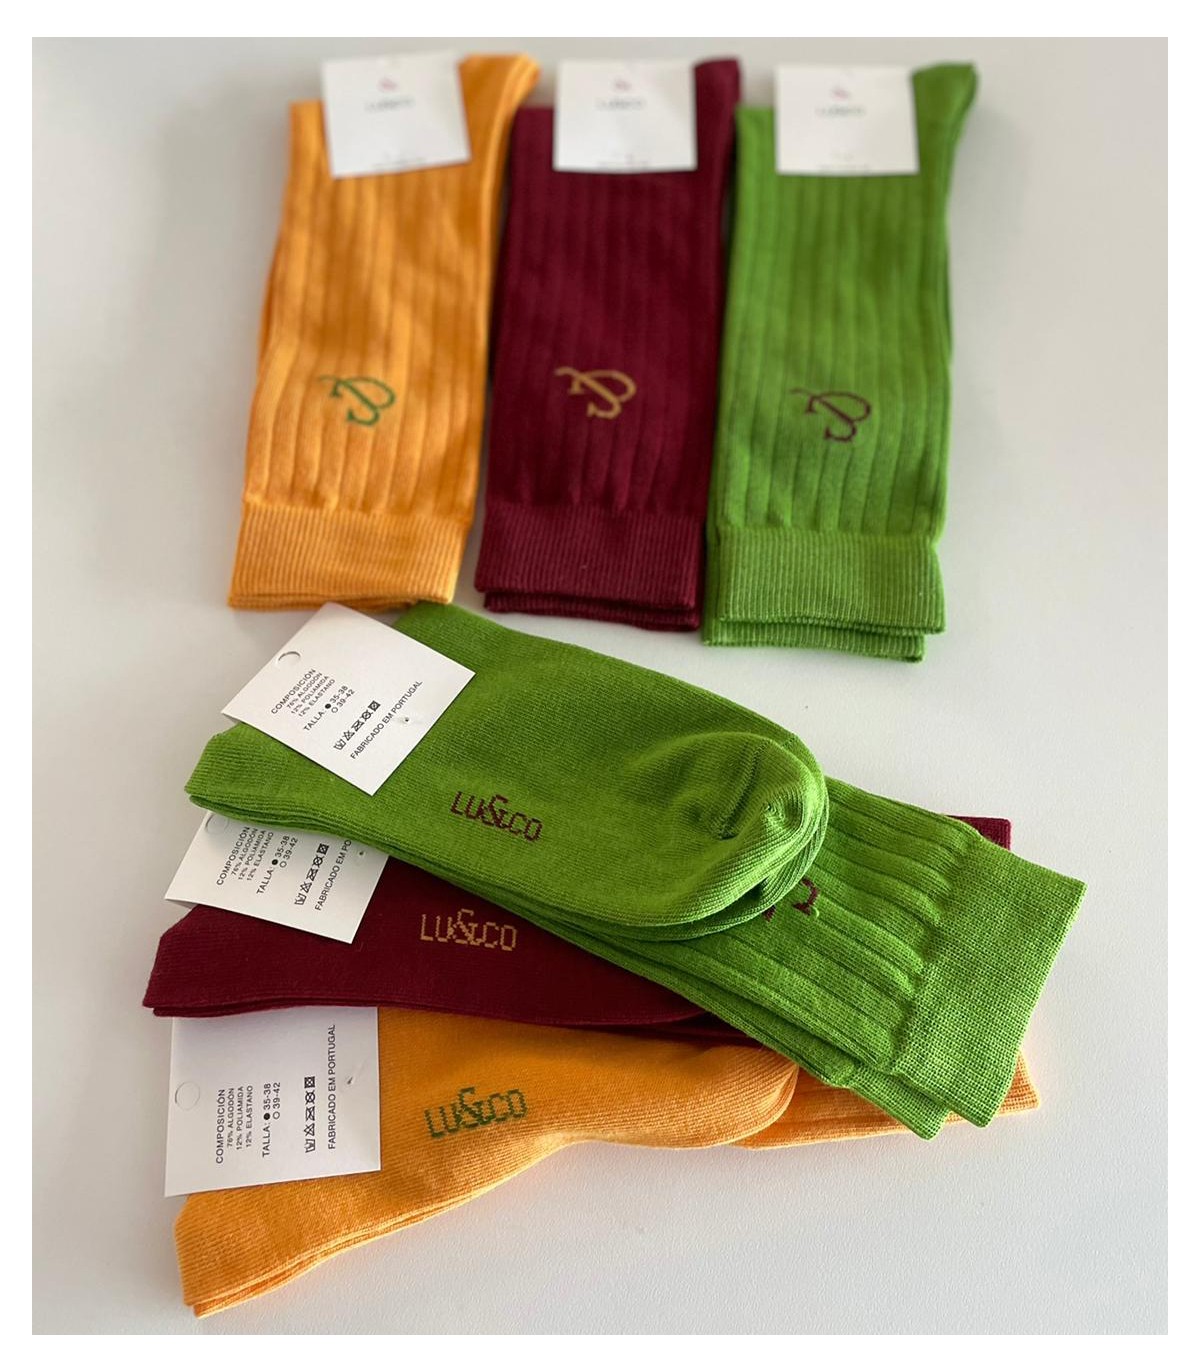 Calcetines (Pack 3 colores) Talla Calcetines 35-38